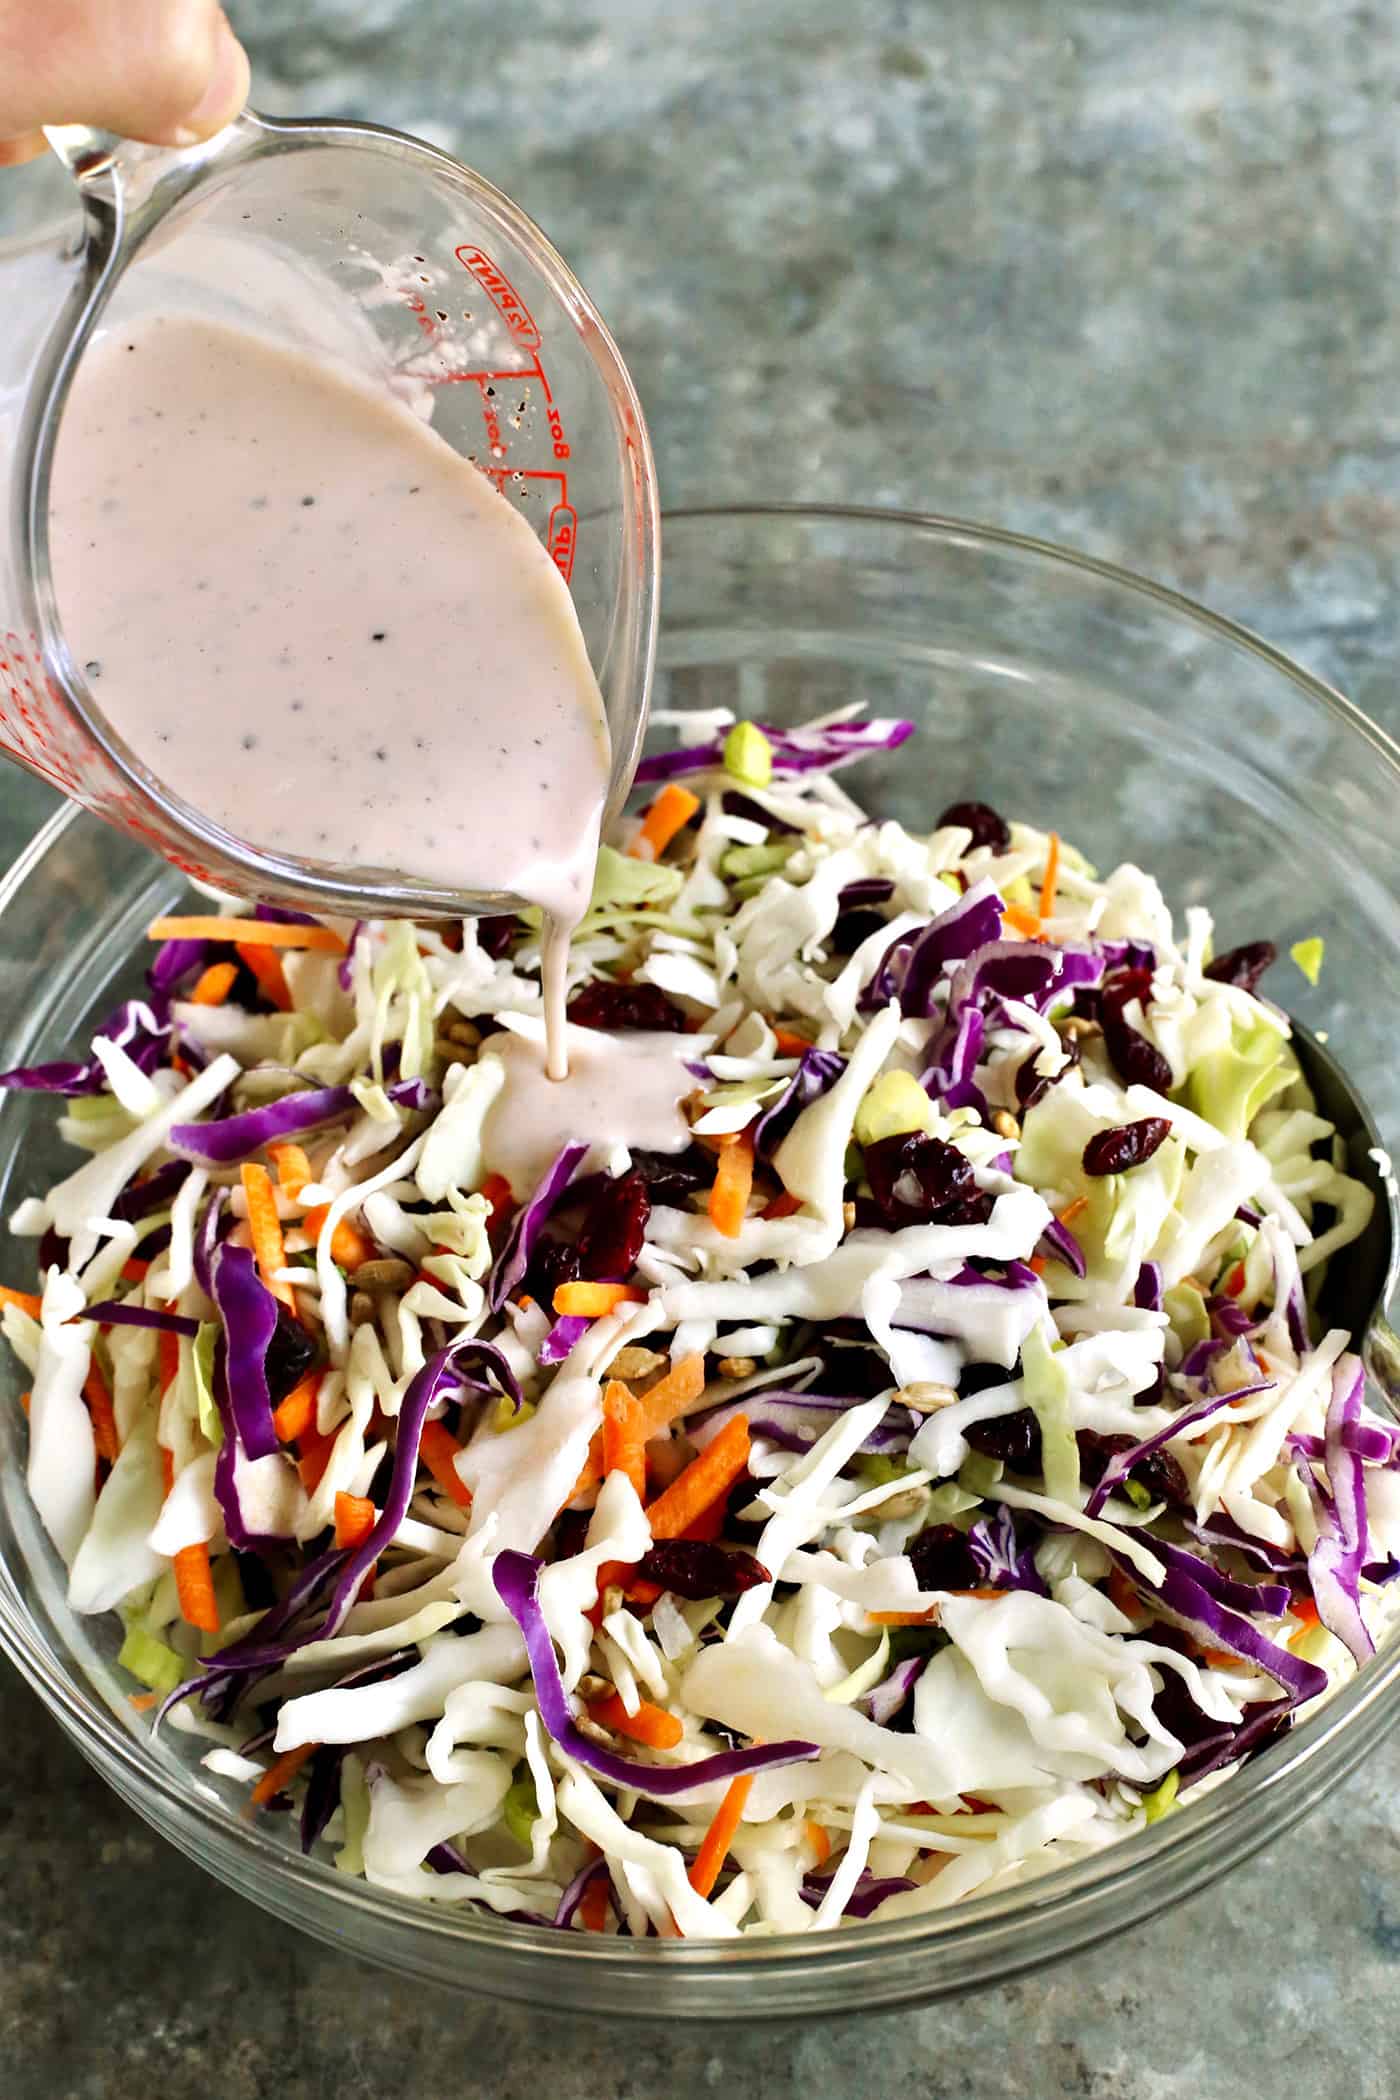 Dressing being poured over a bowl of coleslaw